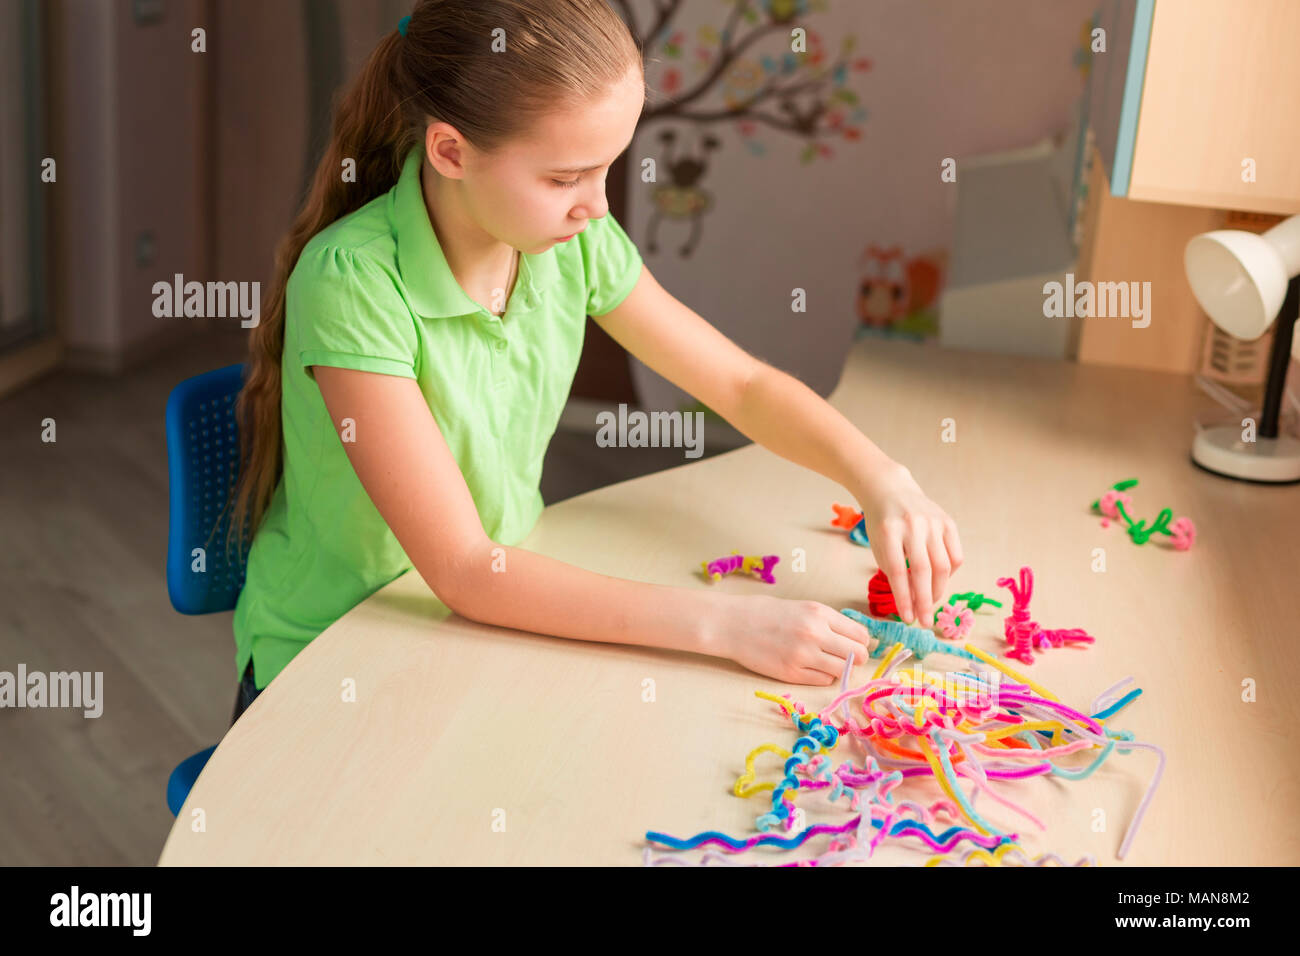 Cute little girl creating toys with chenille sticks at the table. Creativity and handmade concept. Stock Photo